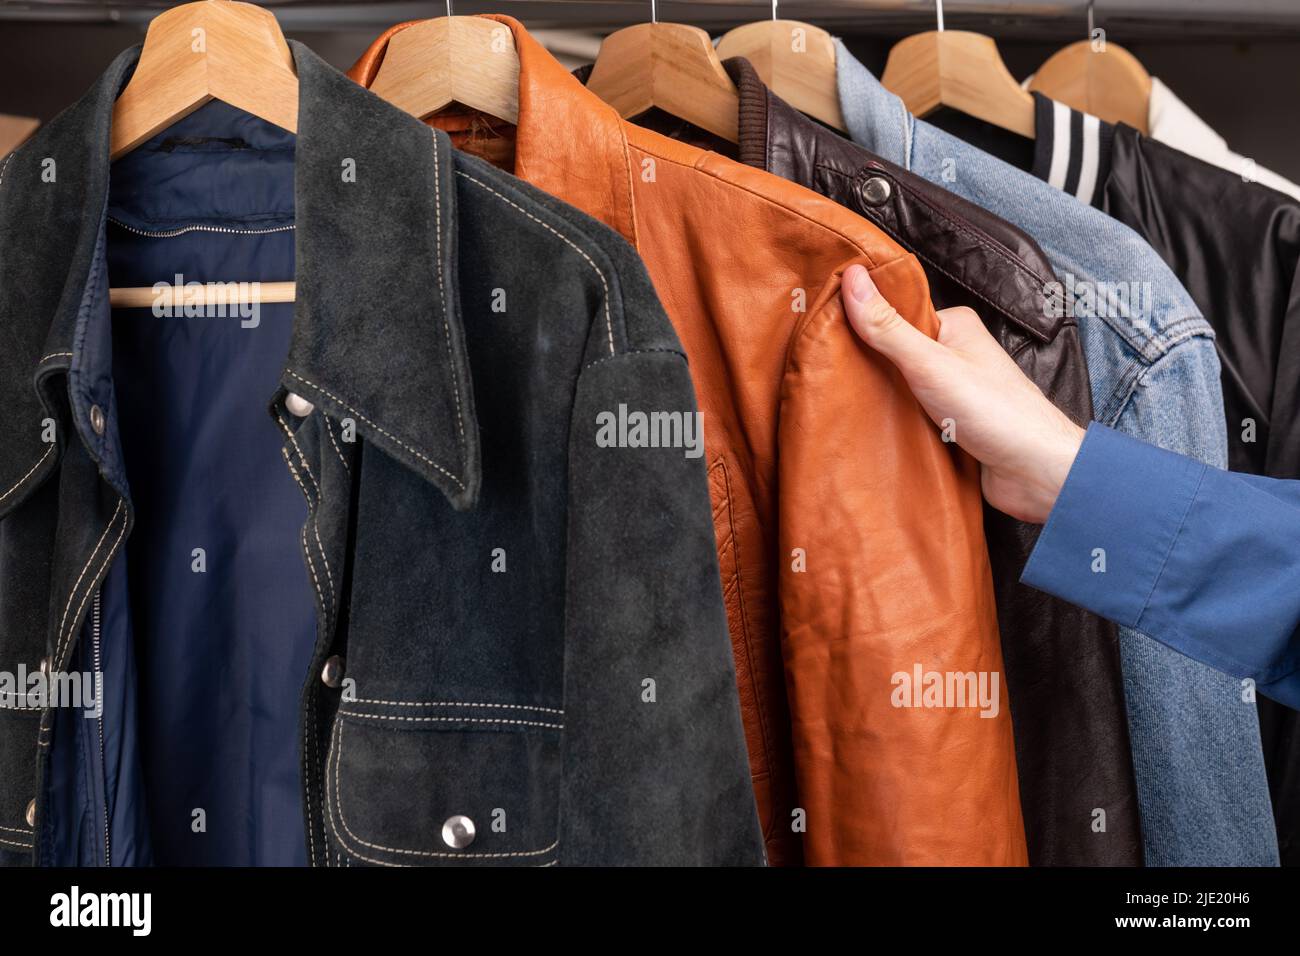 Man choosing clothing in a second hand store. Various vintage suede leather and jeans jackets hang on clothing rack. Thrifting and sustainability in c Stock Photo